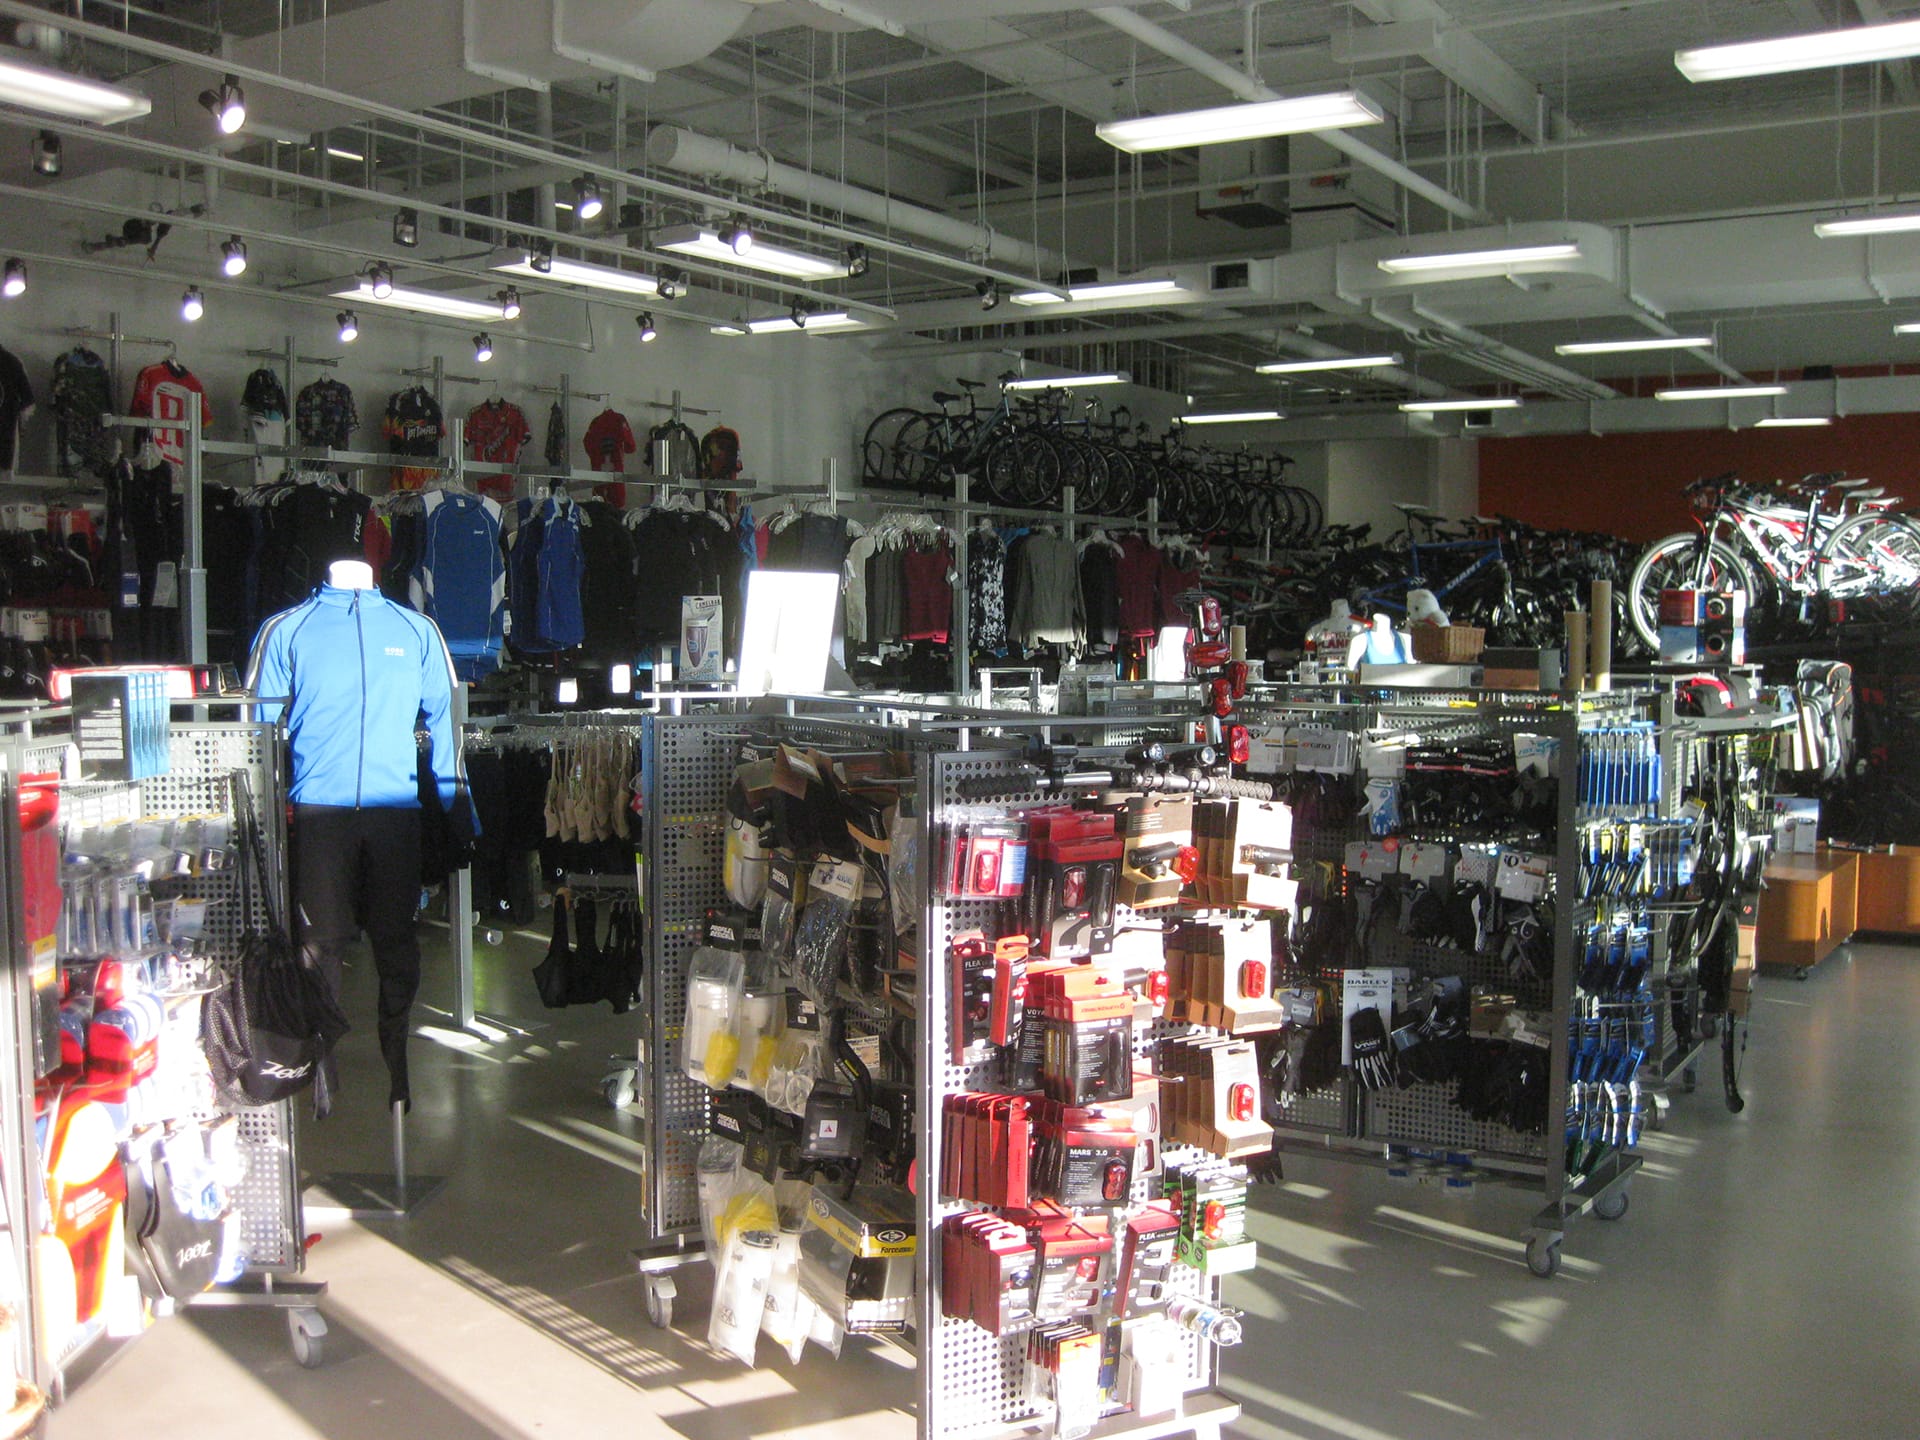 Racks of bike-related accessories and clothing in a bike shop.